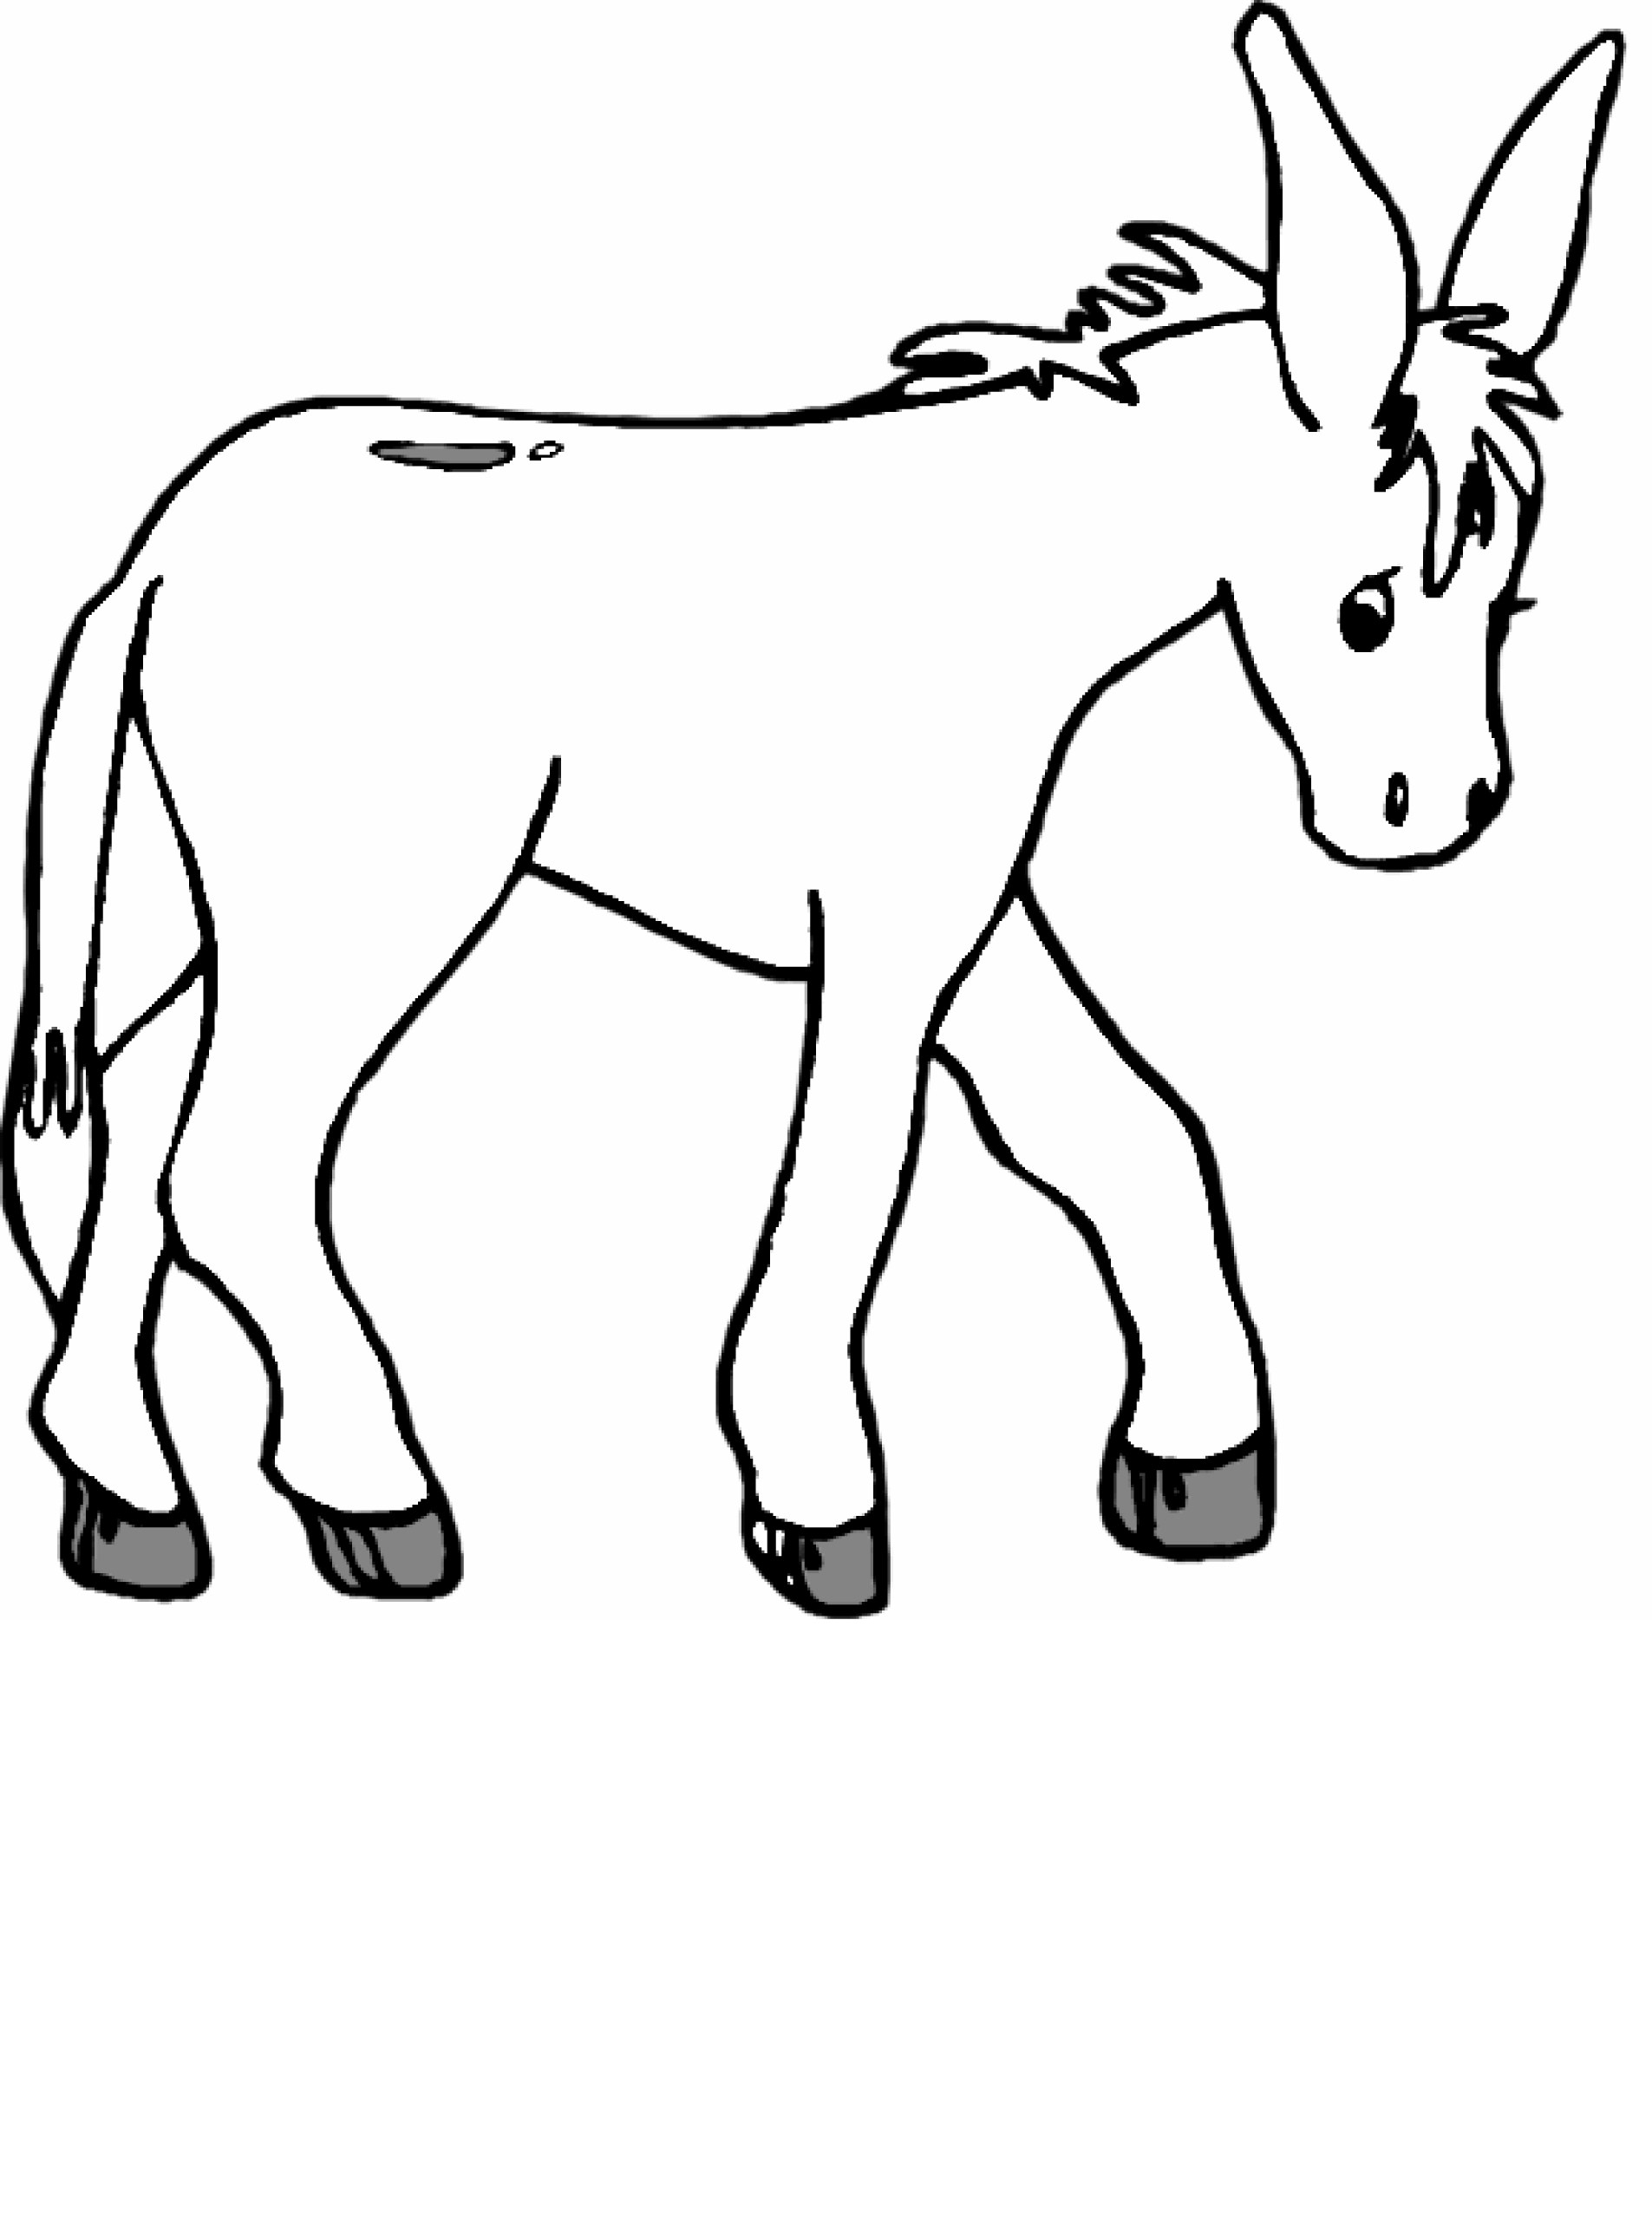 Donkey Coloring Page Free Printable Donkey Coloring Pages For Kids